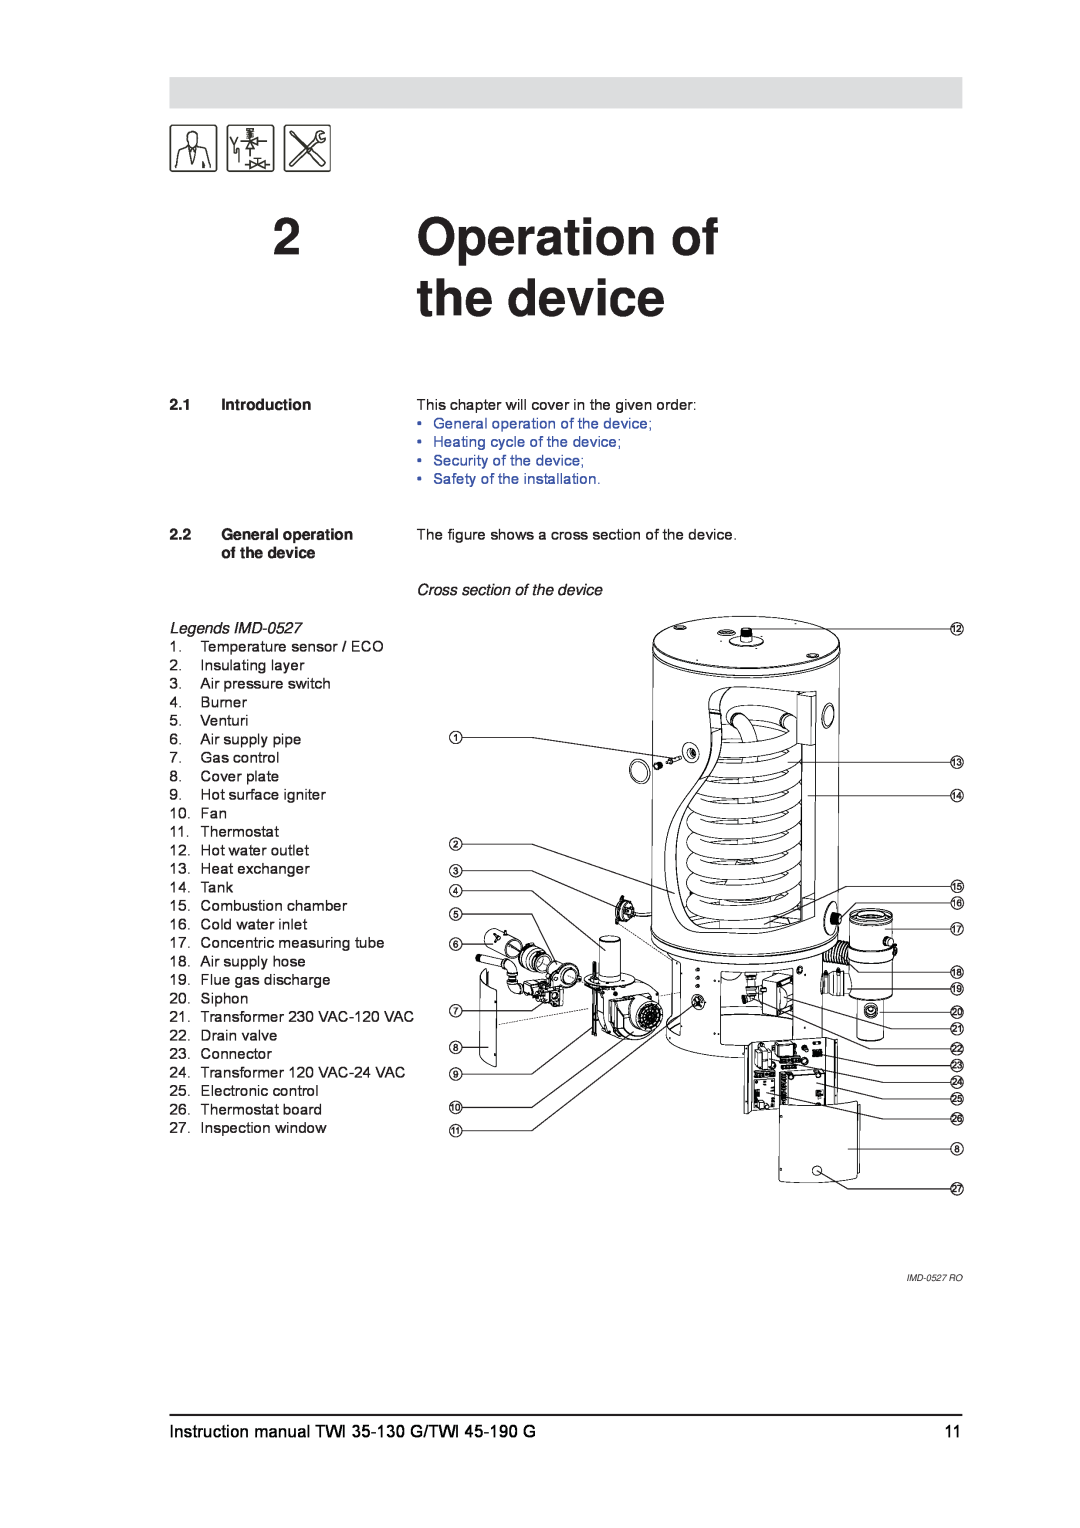 A.O. Smith TWI 35-130 Operation of the device, Introduction, This chapter will cover in the given order, General operation 